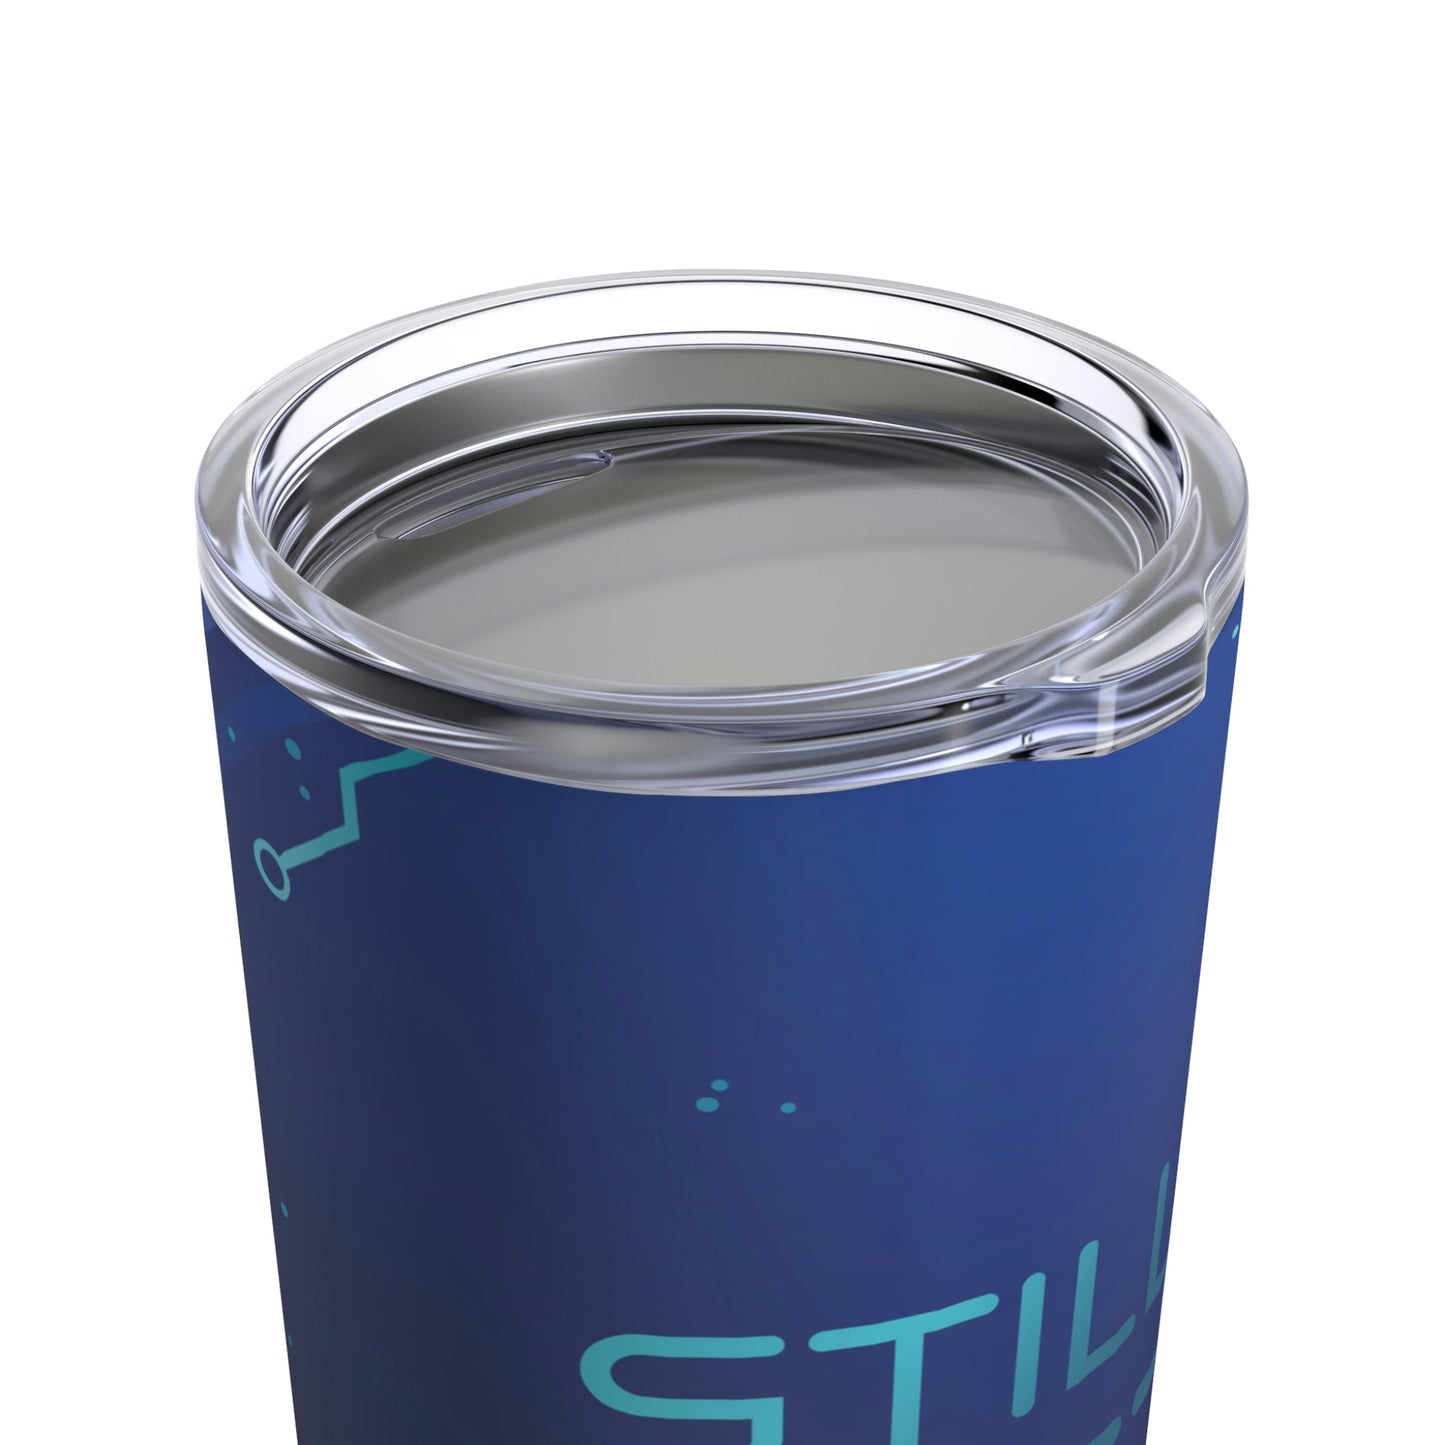 Still in Beta IT Funny Quotes Art Stainless Steel Hot or Cold Vacuum Tumbler 20oz Ichaku [Perfect Gifts Selection]